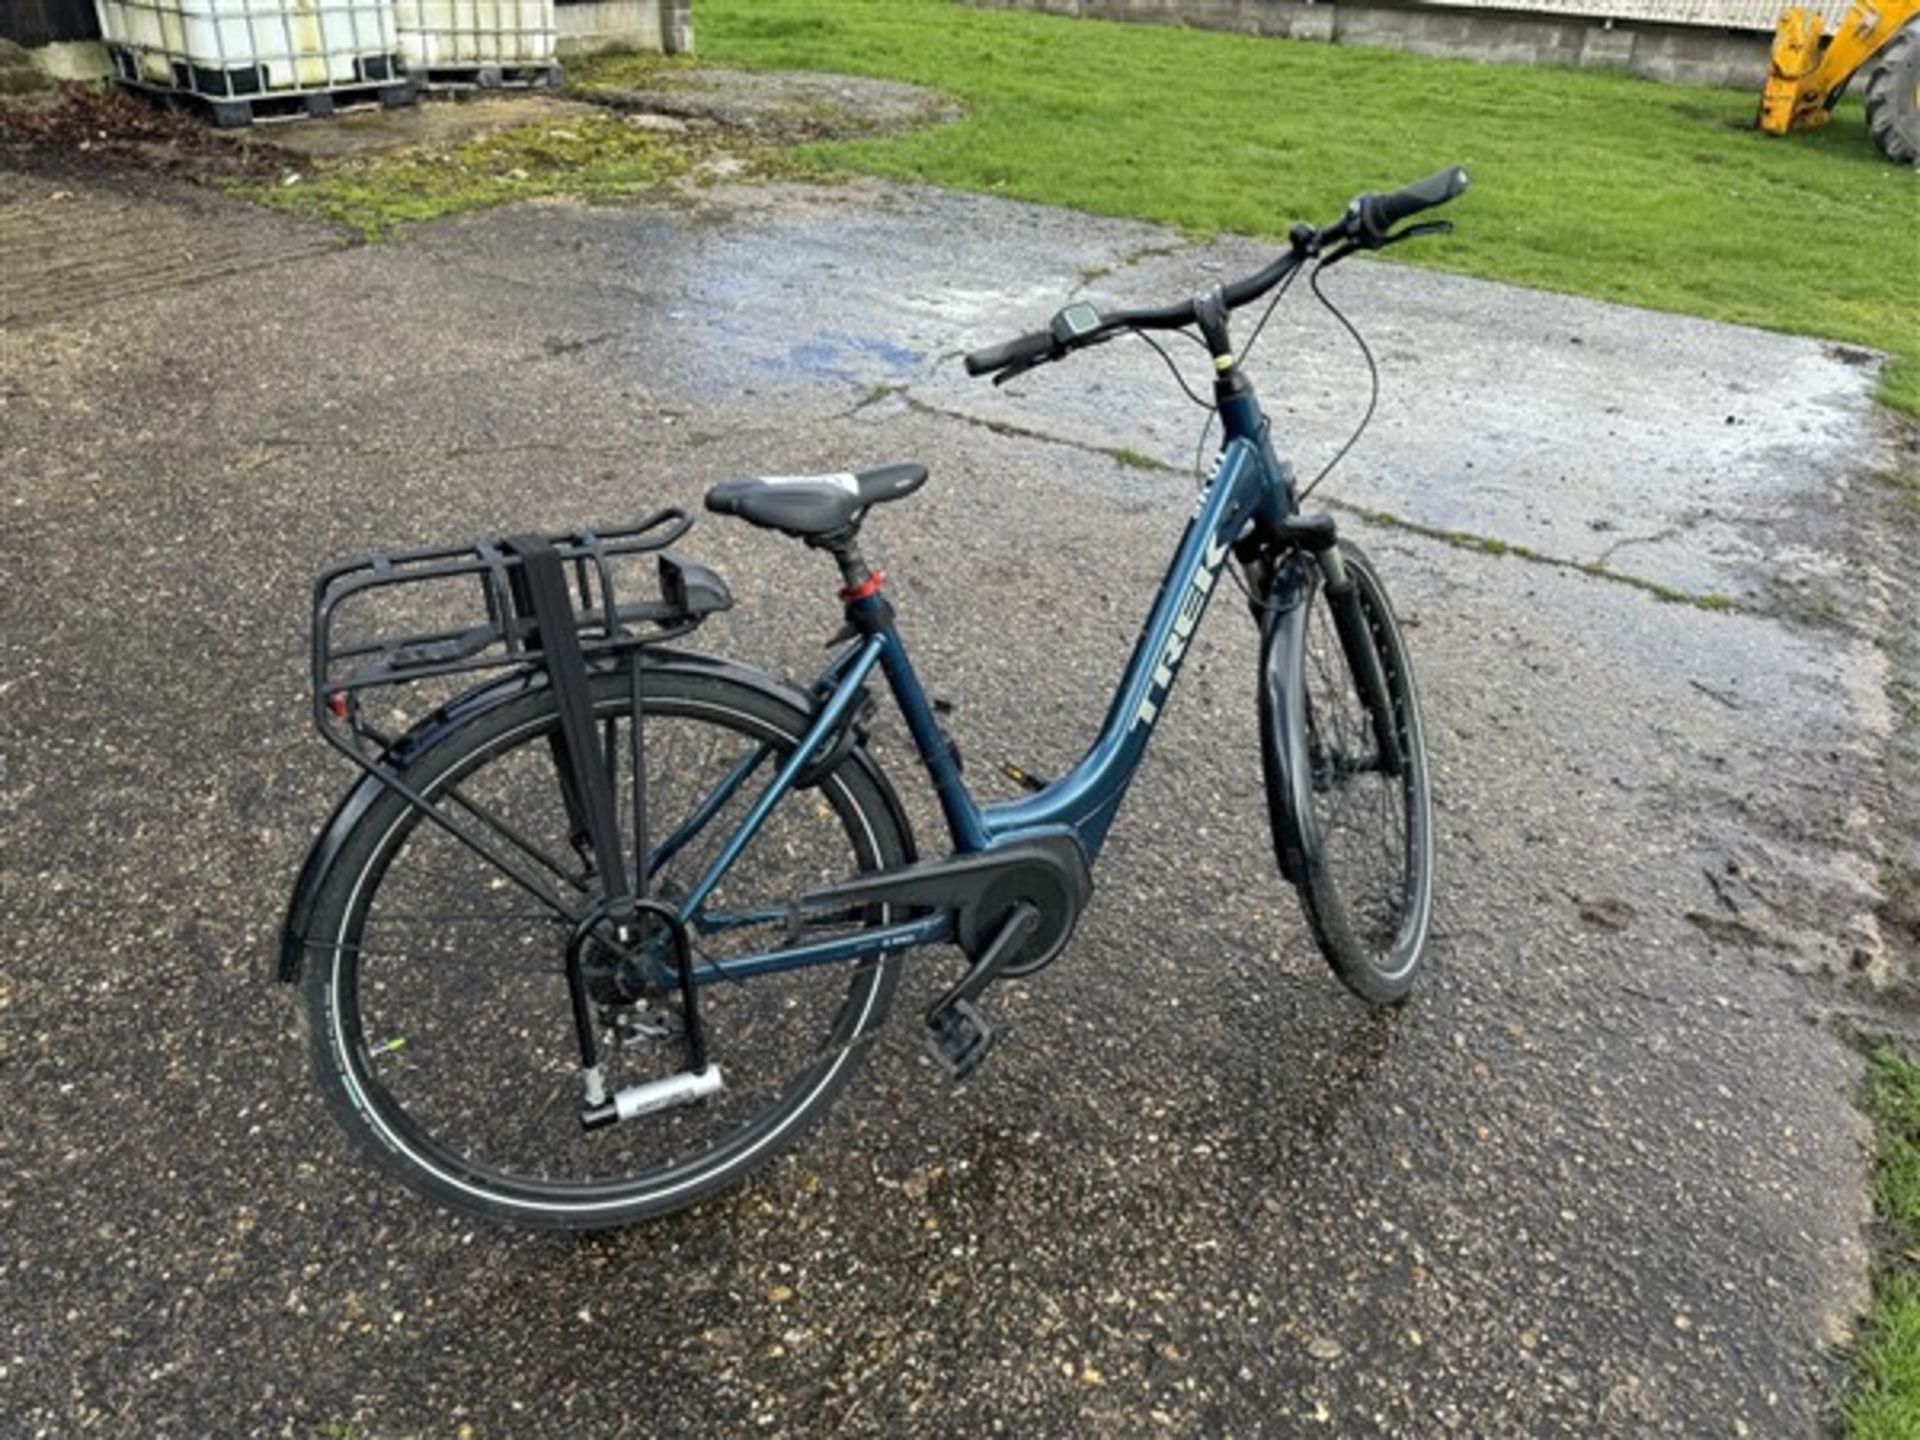 Trek Verve +1 electric bike with rear bag holder and Bosch display, tyre size 28 x 2.00 (no - Image 6 of 8